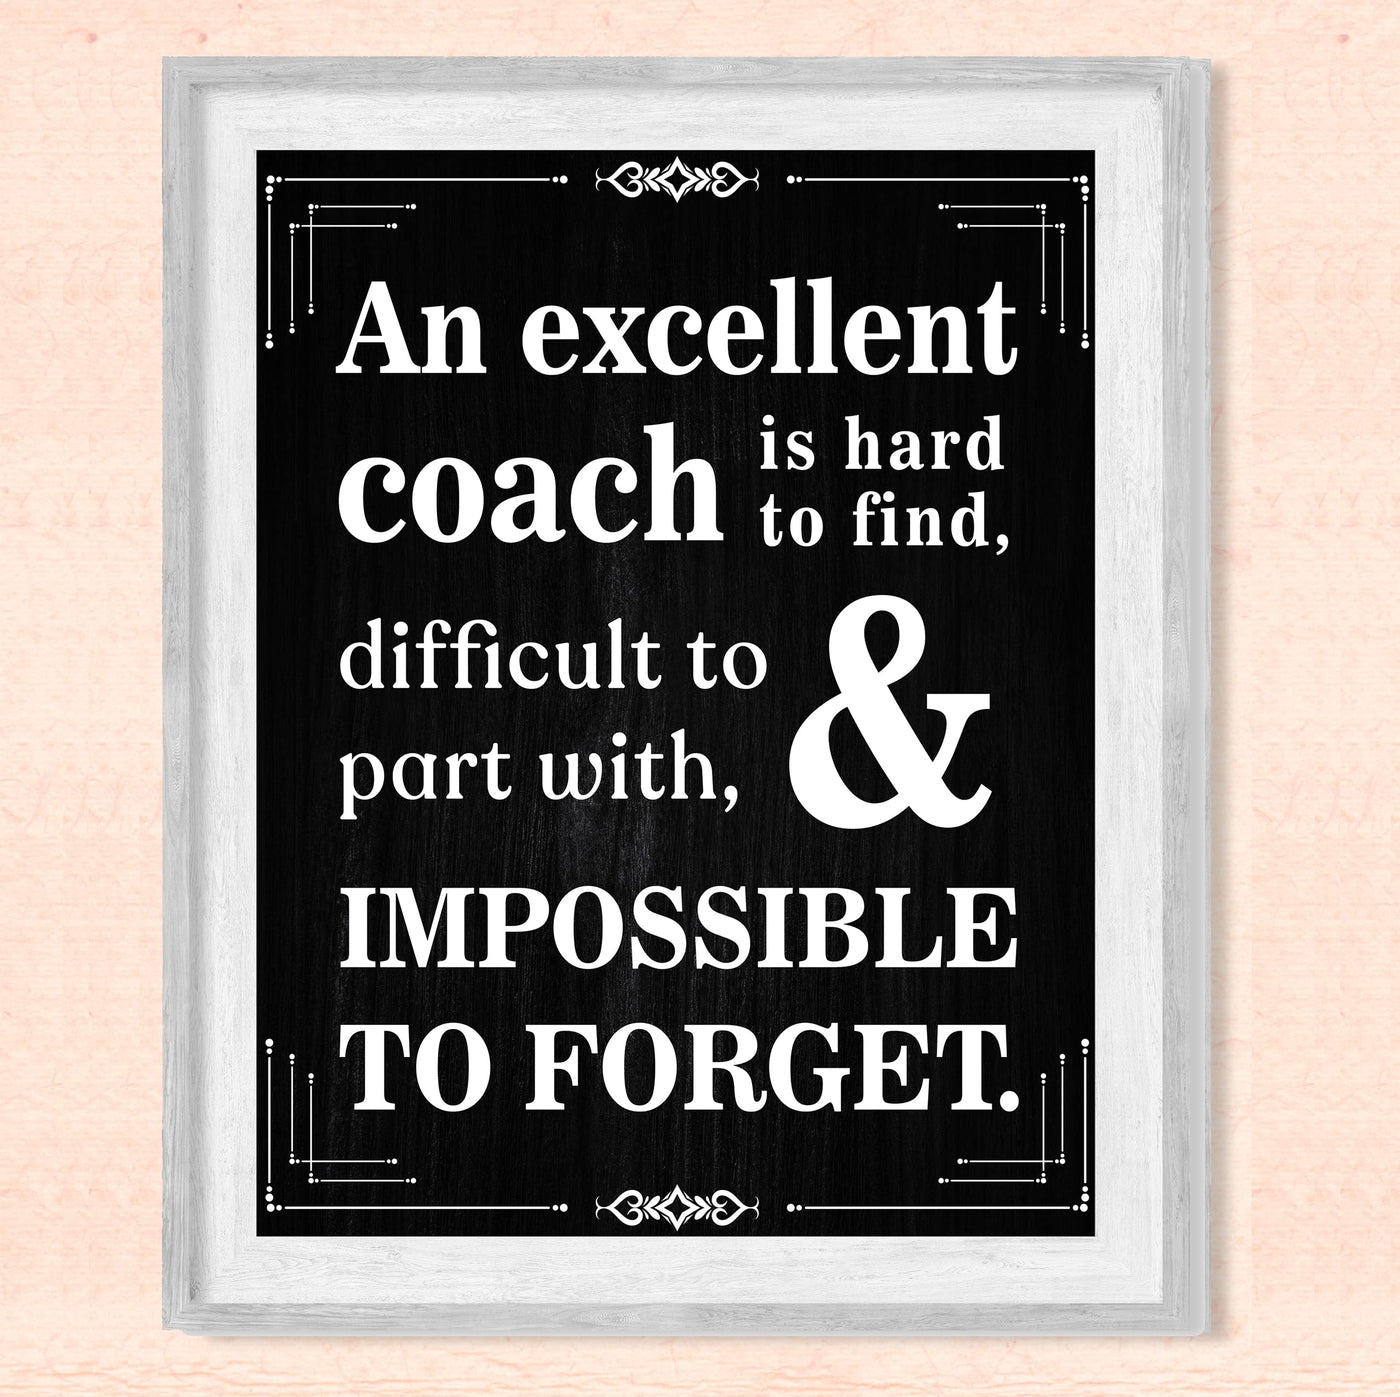 "Excellent Coach Hard to Find"- Inspirational Wall Art Print -Ready to Frame. Ideal for Home-School-Gym-Coach's Office-Locker Room Decor. Great Gift for All Coaches!